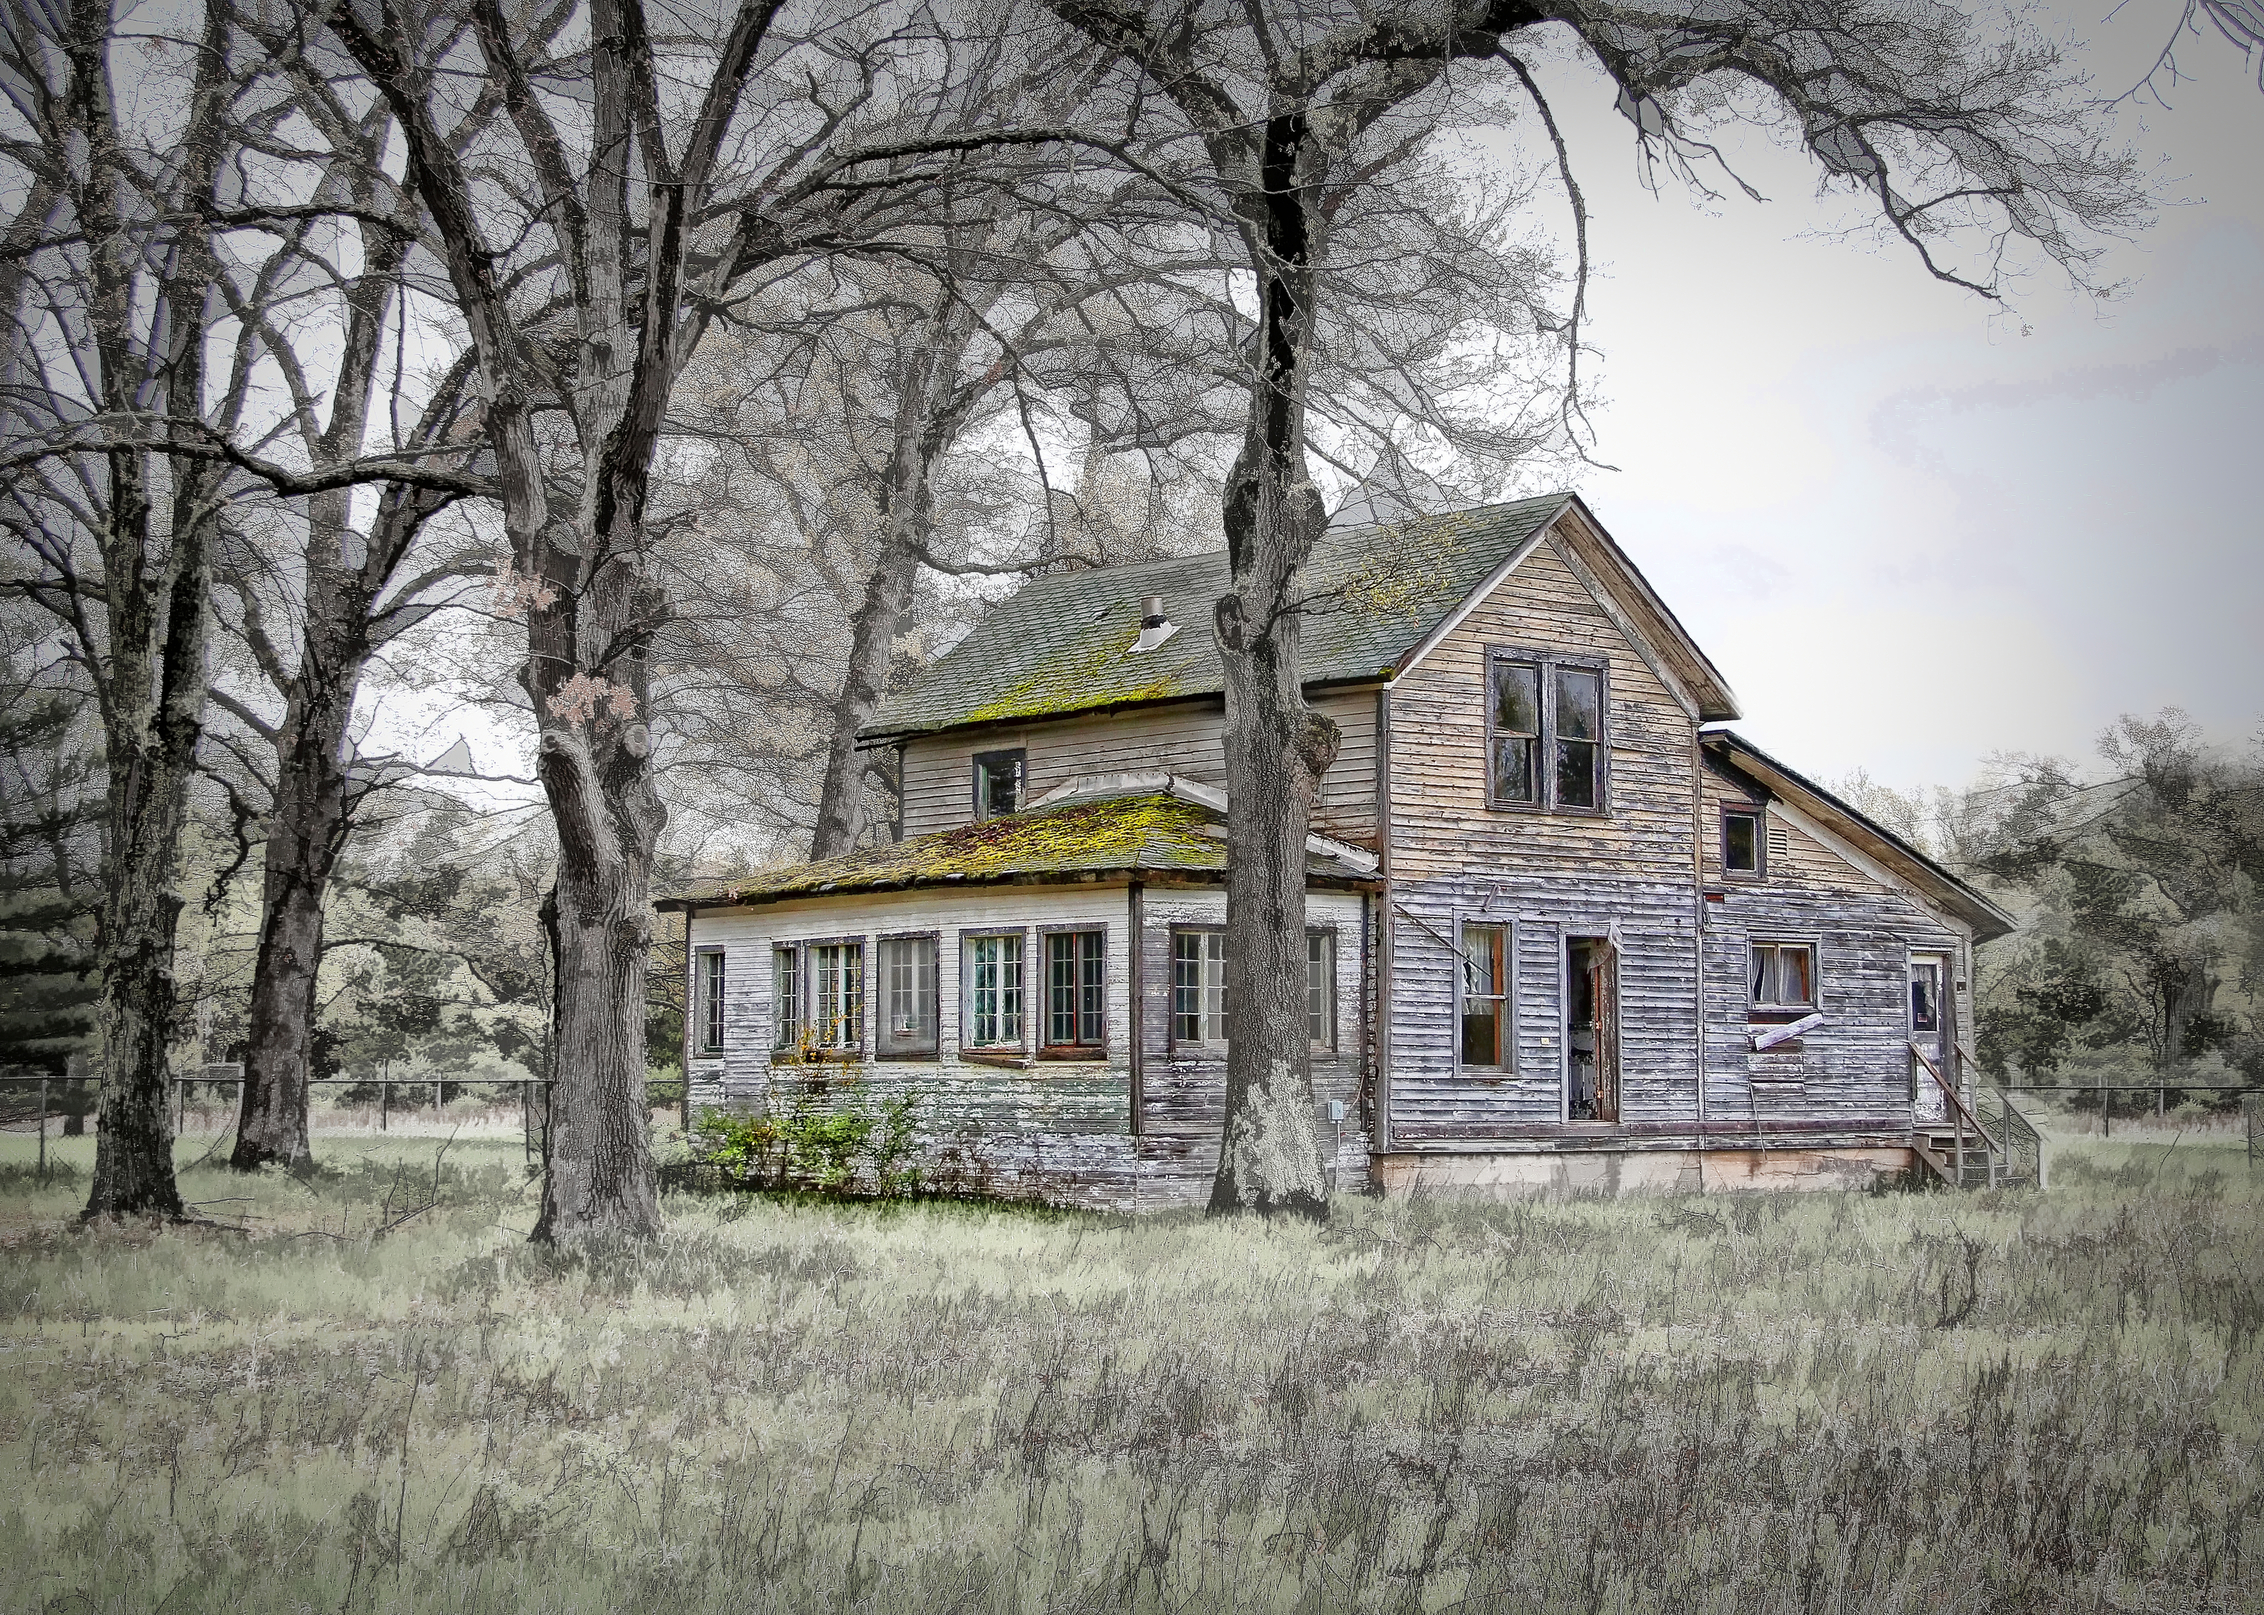 The Old Homestead - Scenery and Architecture - Topaz Discussion Forum